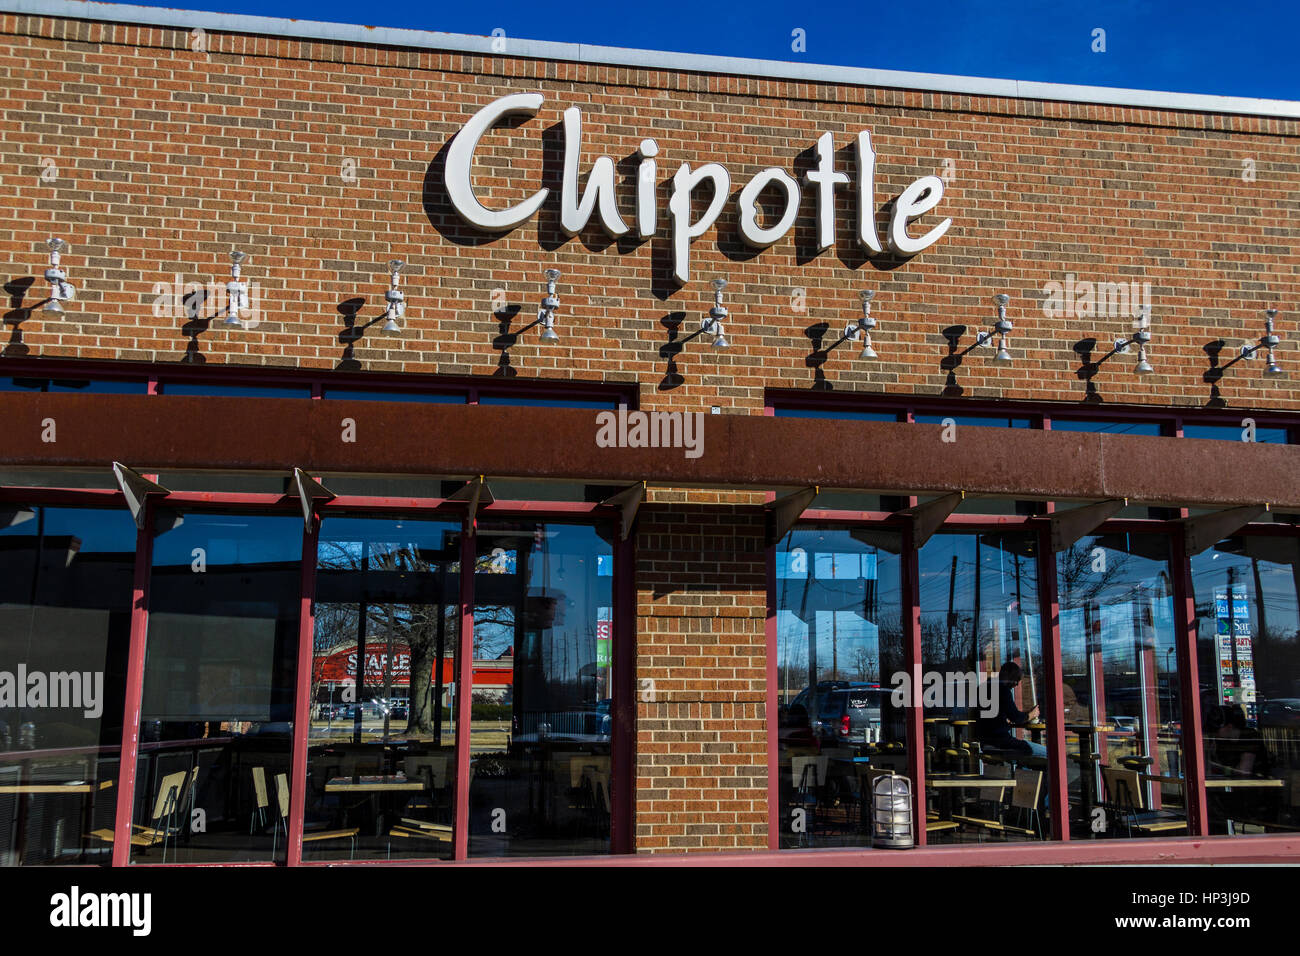 Indianapolis - Circa February 2017: Chipotle Mexican Grill Restaurant. Chipotle is a Chain of Burrito Fast-Food Restaurants X Stock Photo